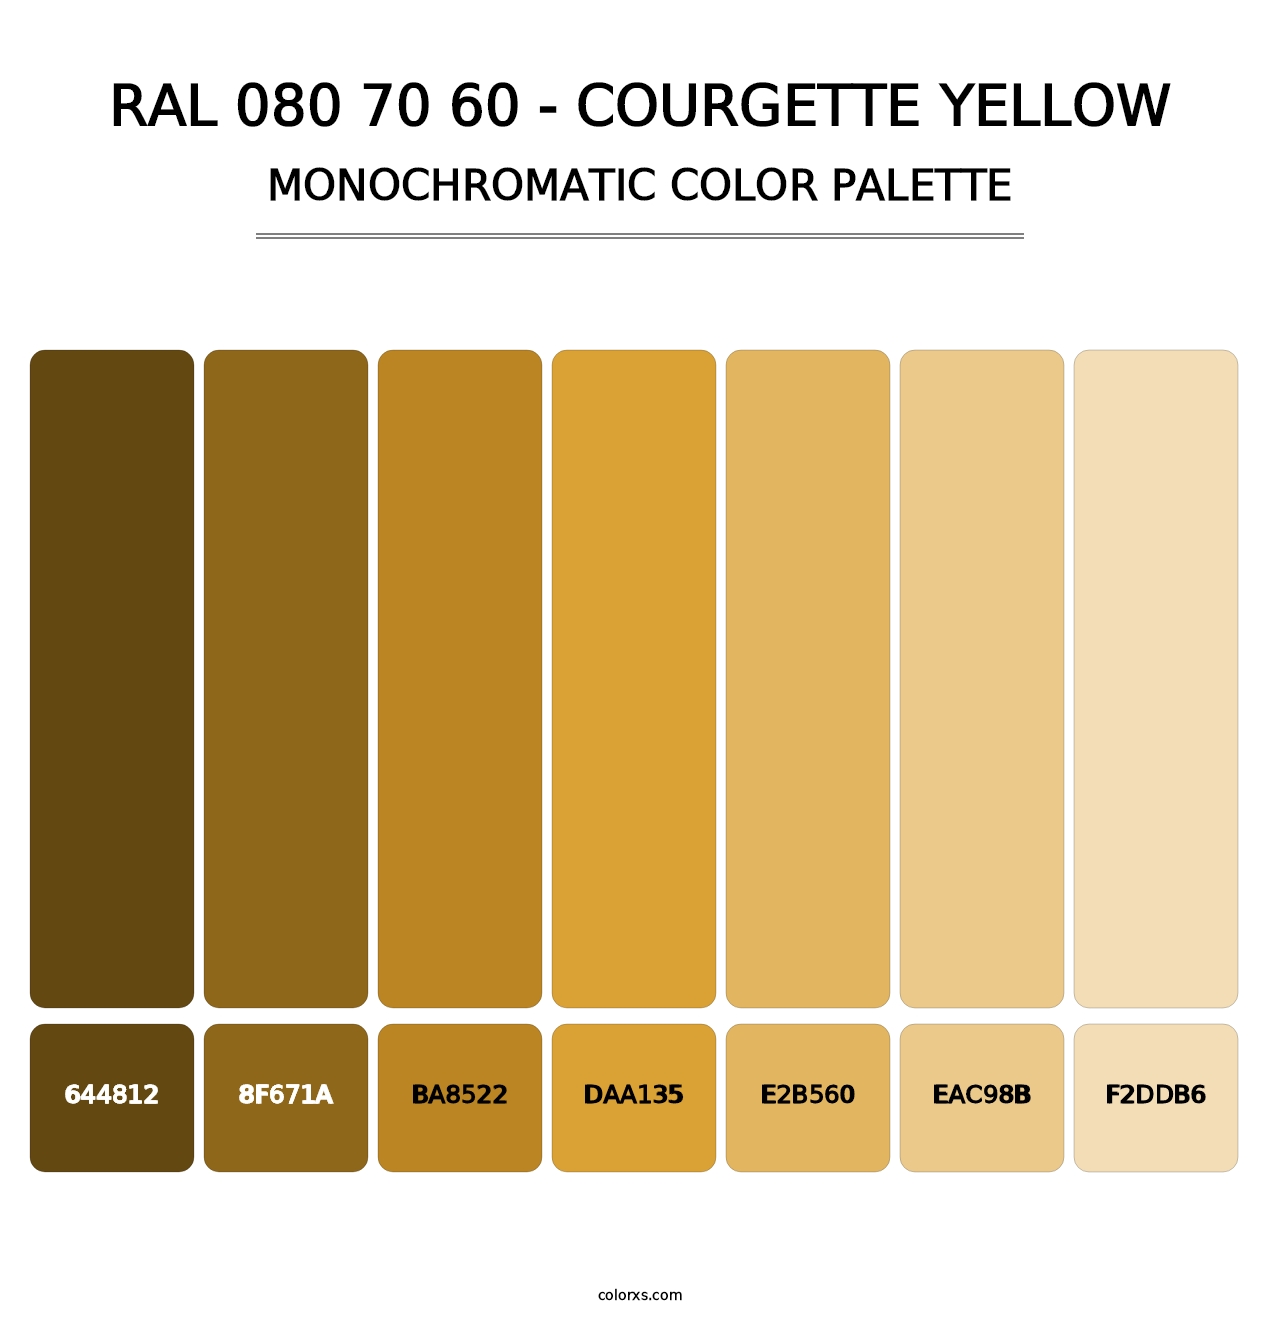 RAL 080 70 60 - Courgette Yellow - Monochromatic Color Palette